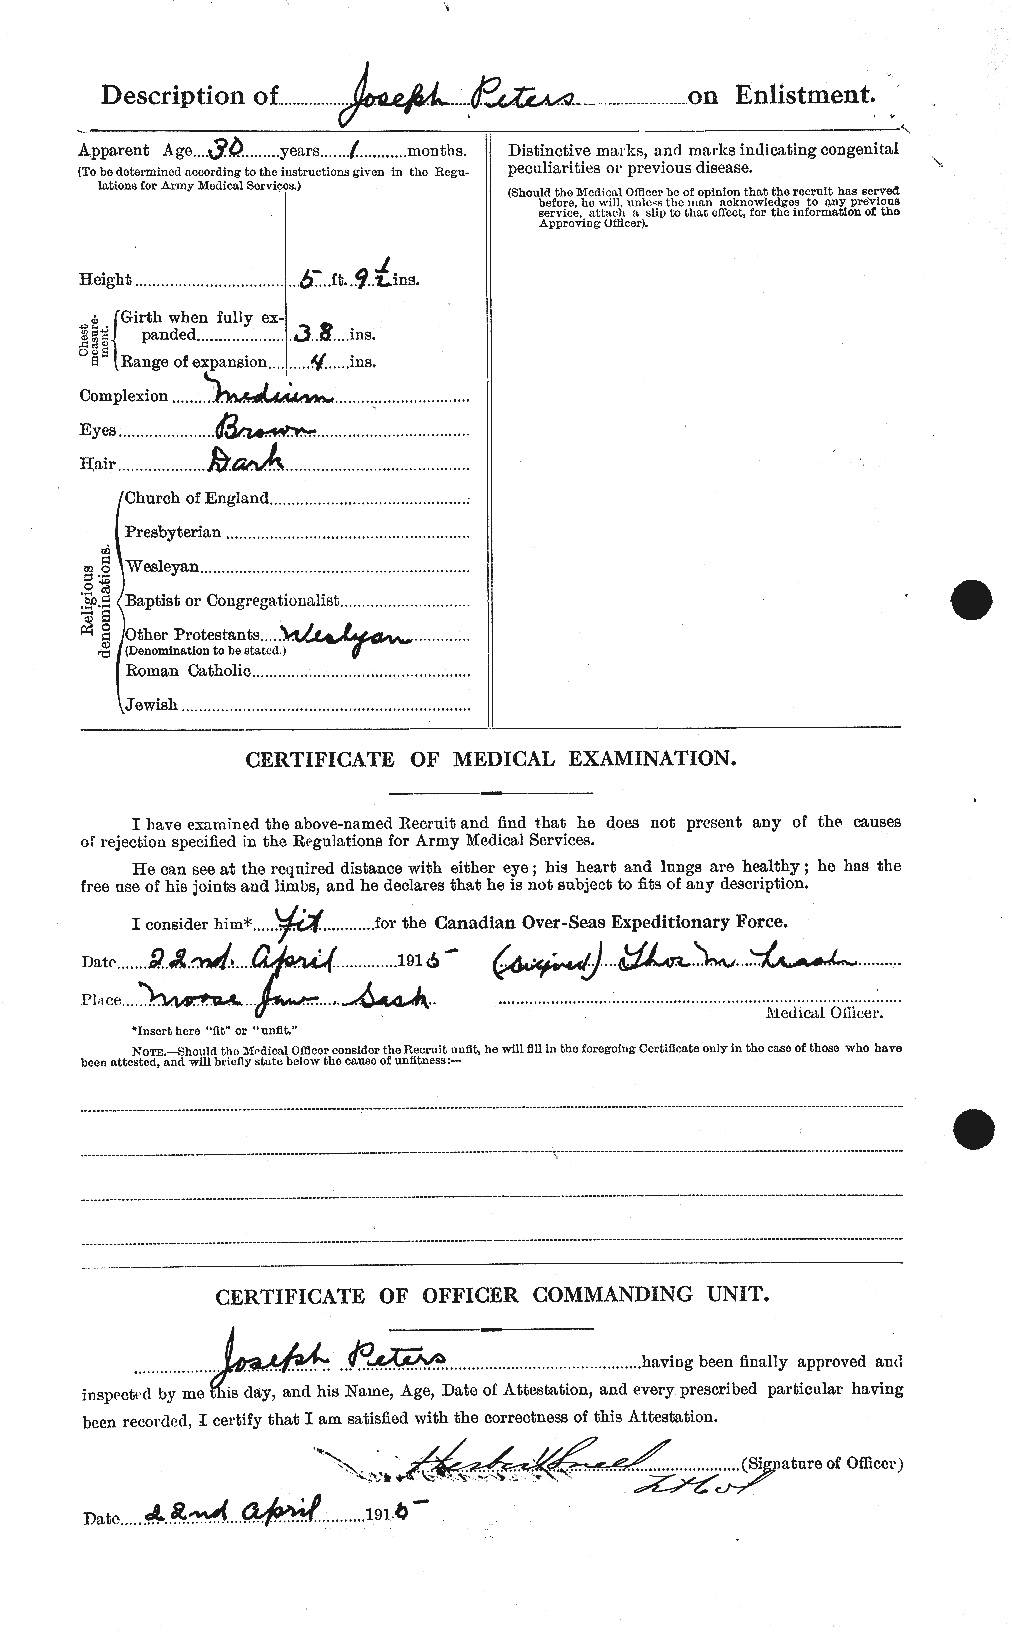 Personnel Records of the First World War - CEF 575554b